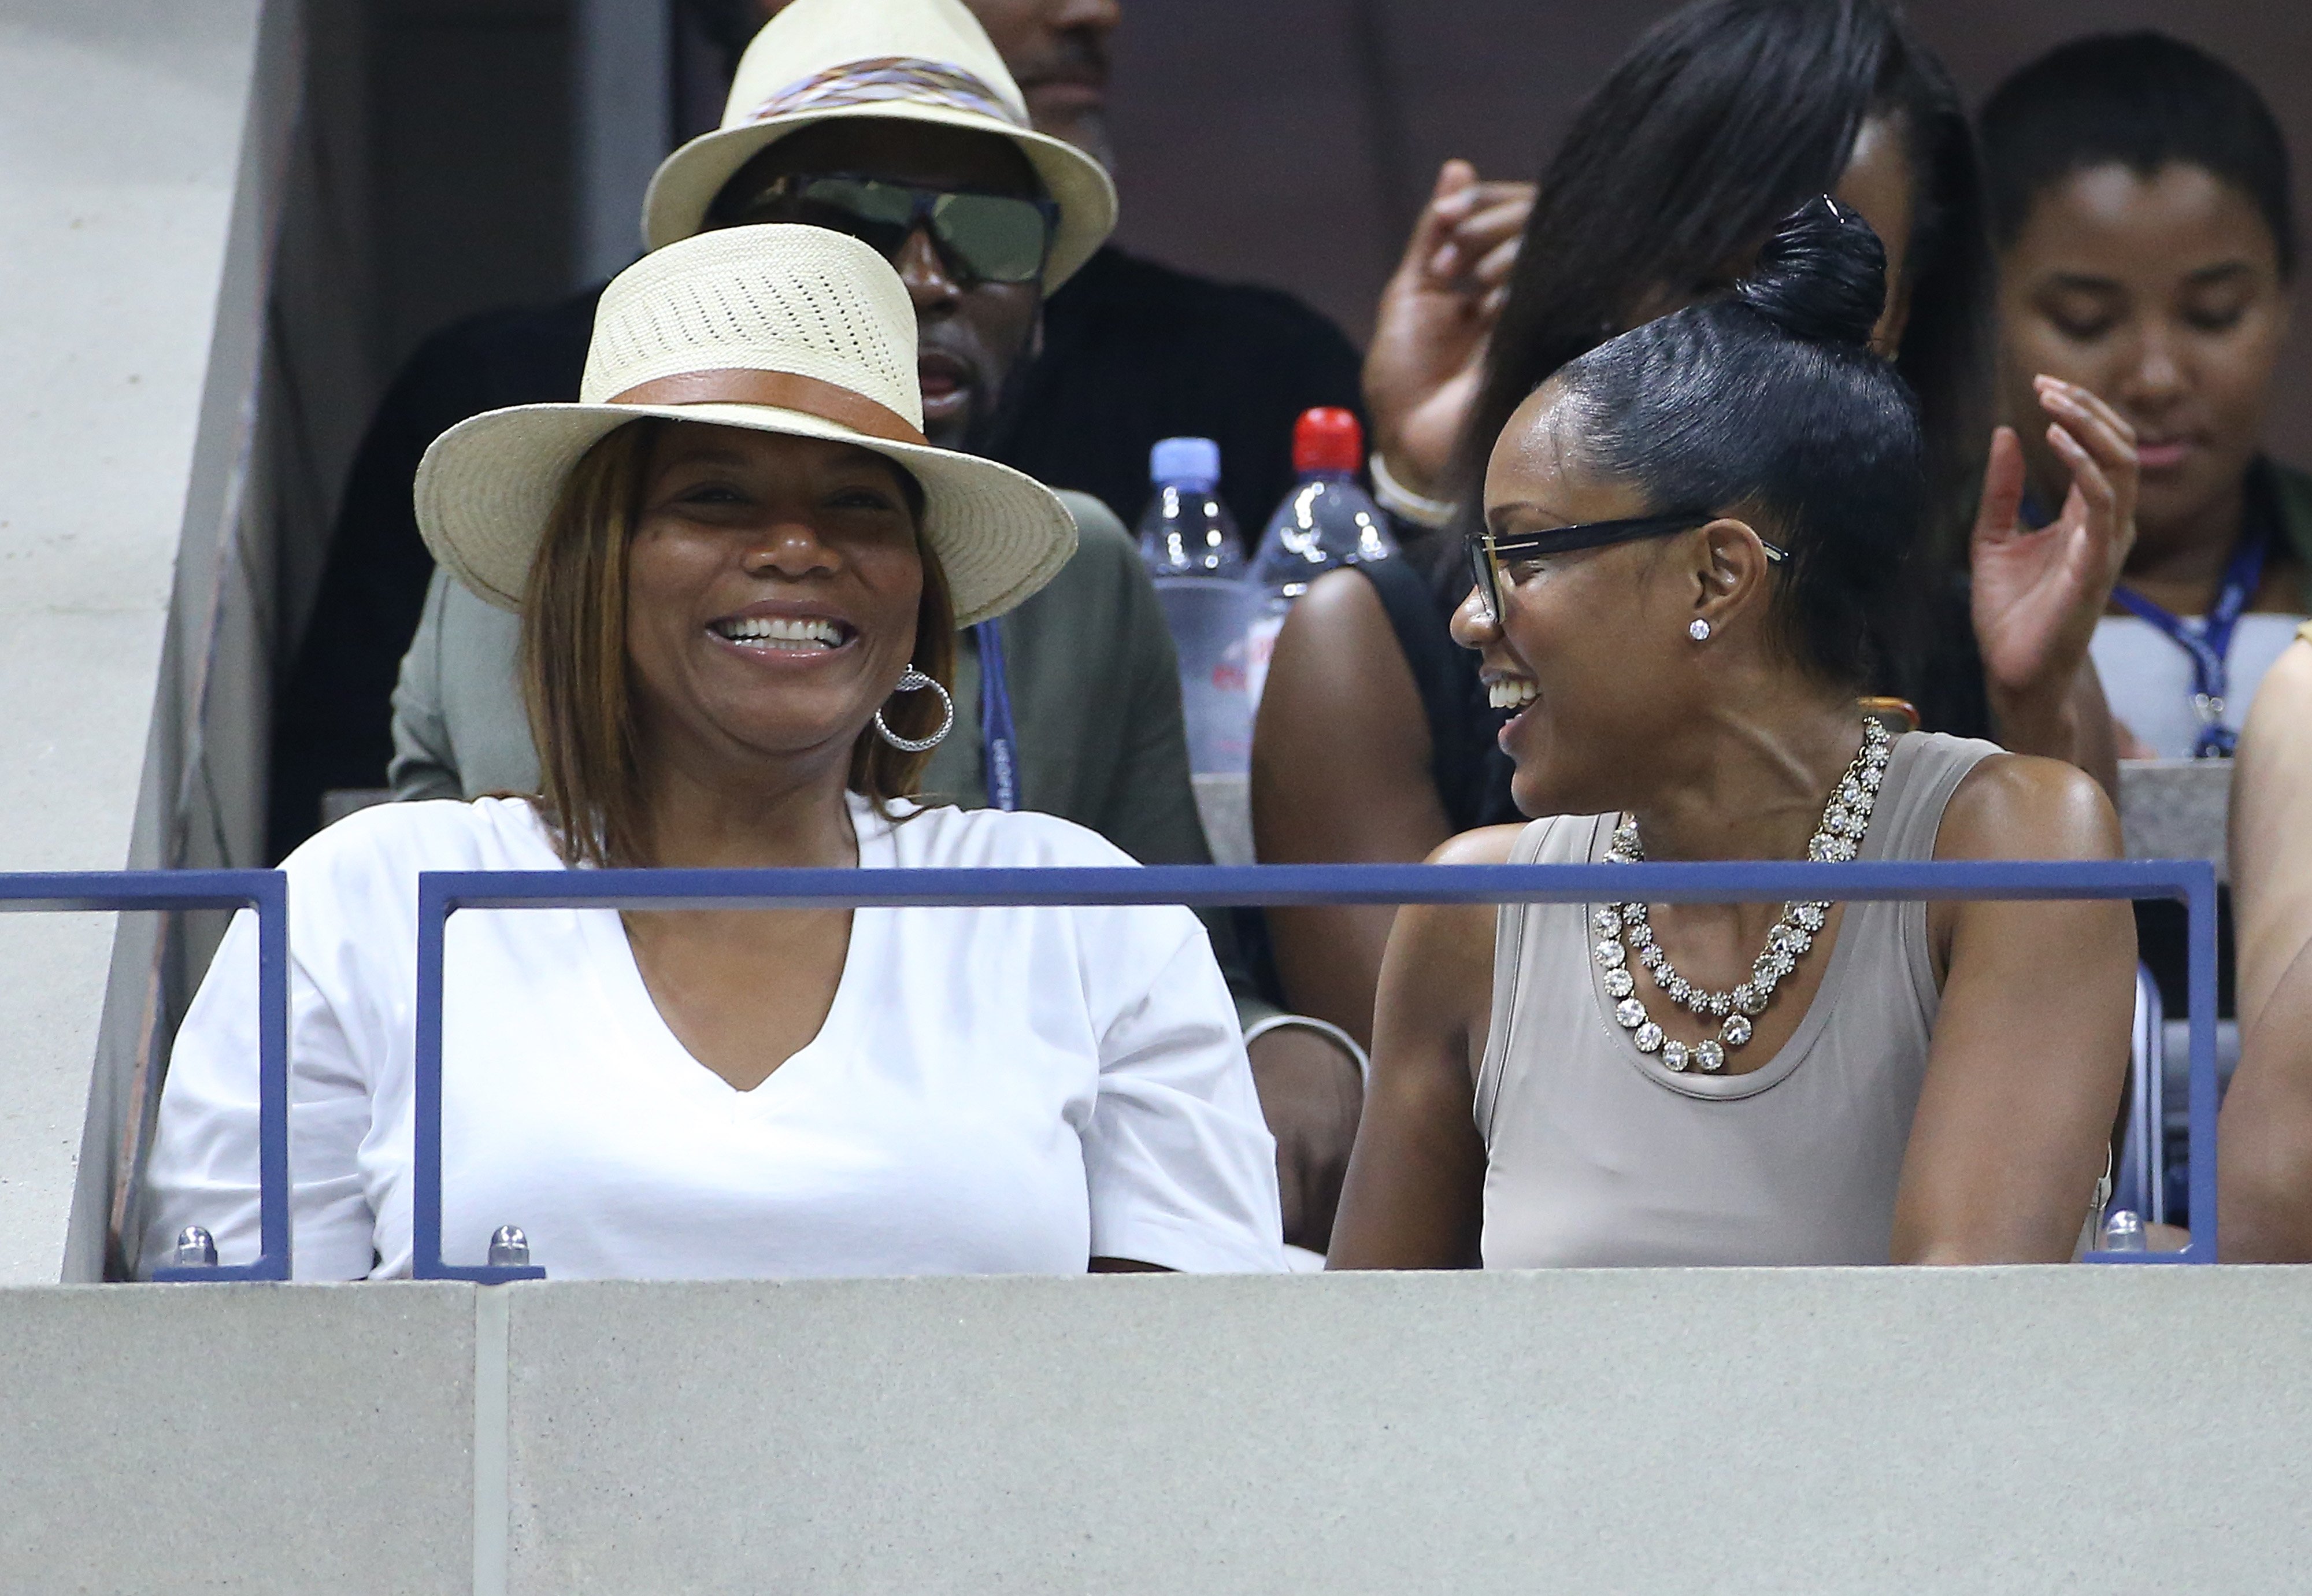 Eboni Nichols and Queen Latifah at the US Open in New York on September 7, 2016 | Source: Getty Images 